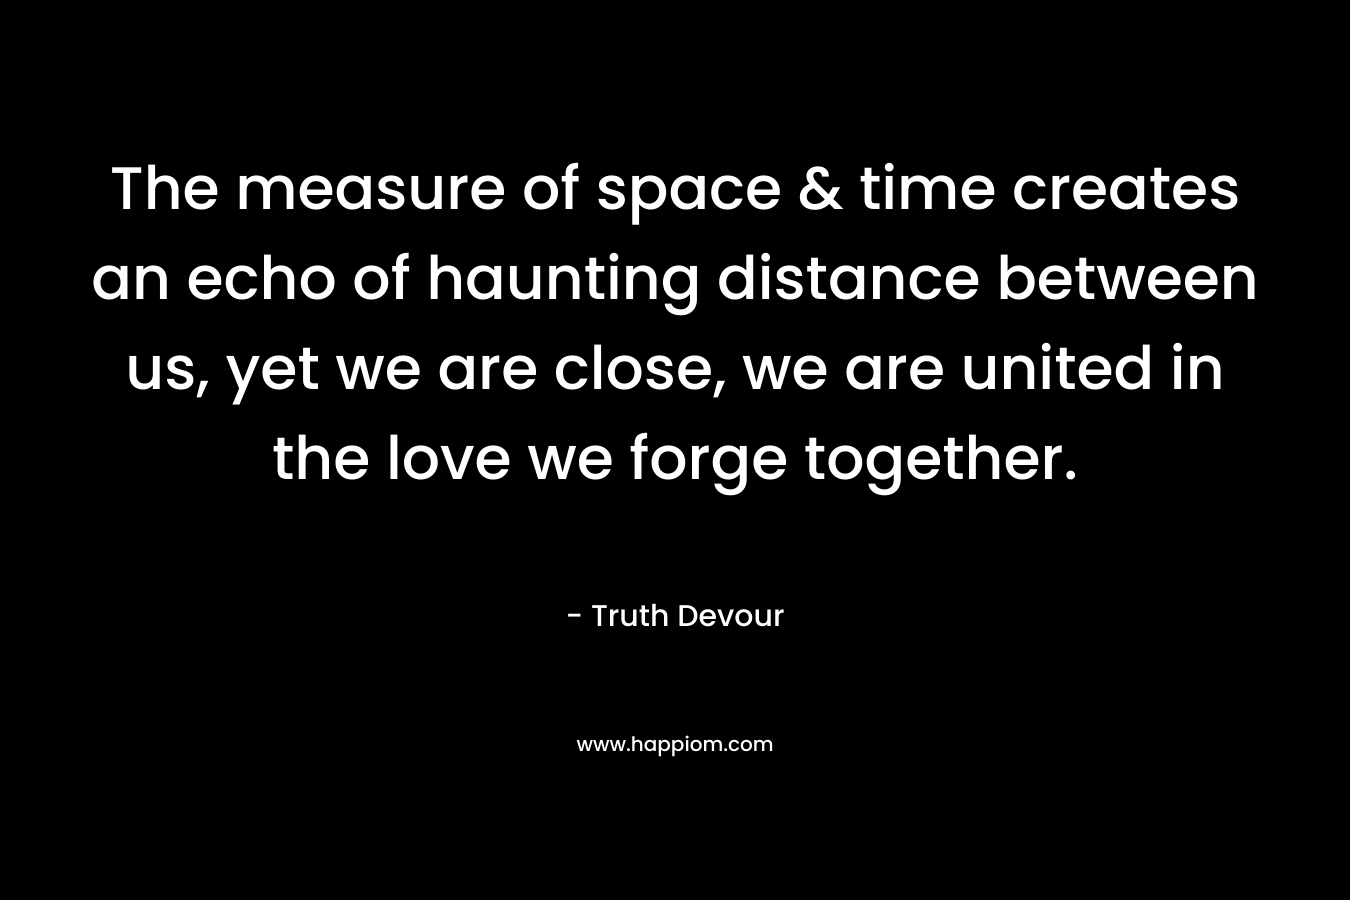 The measure of space & time creates an echo of haunting distance between us, yet we are close, we are united in the love we forge together.